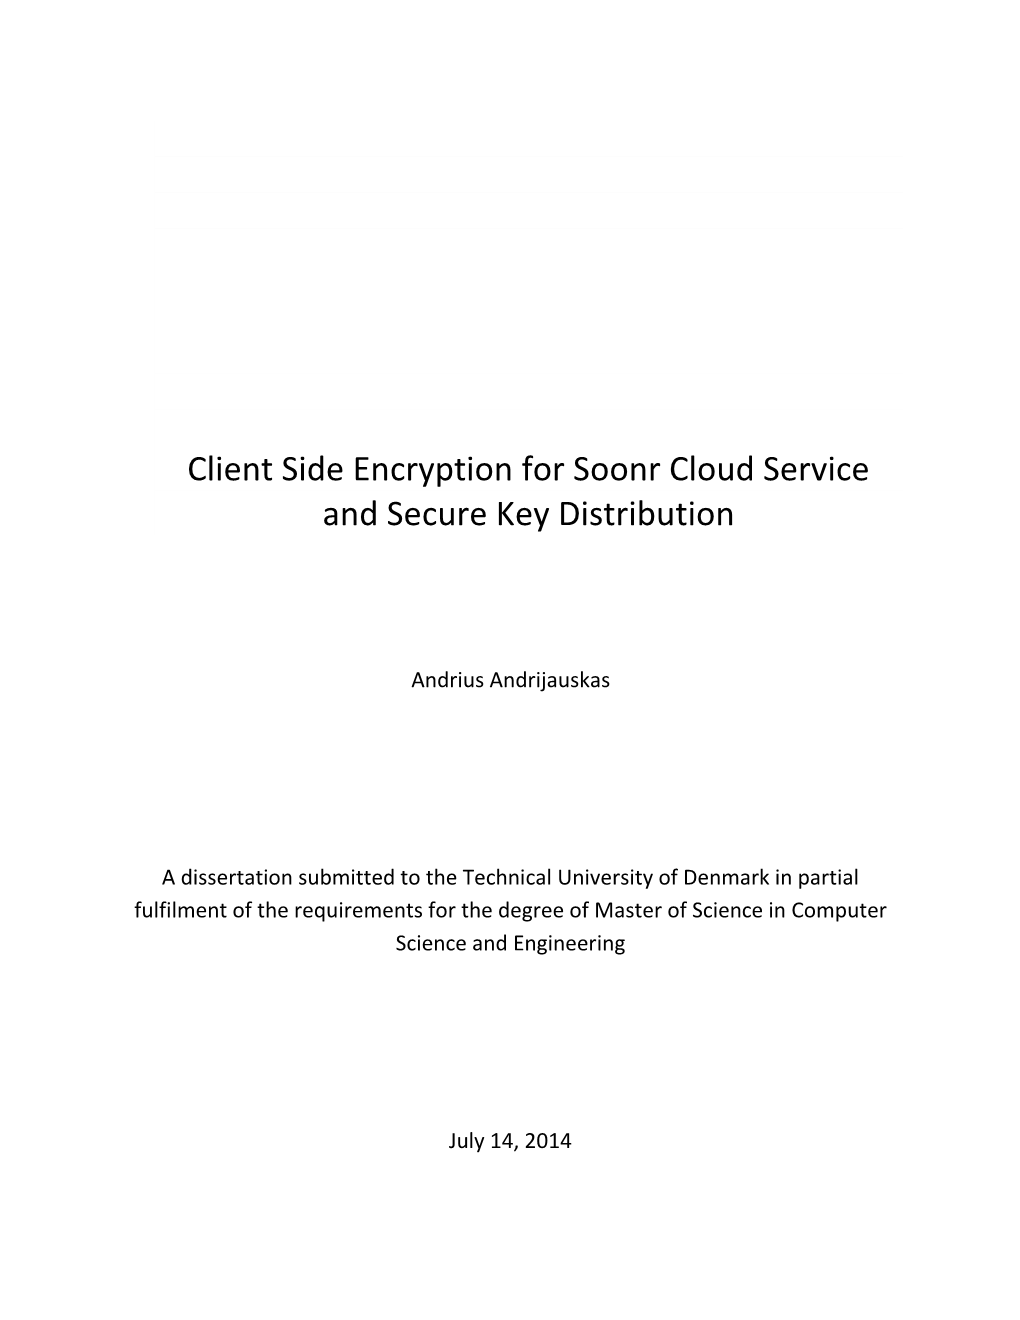 Client Side Encryption for Soonr Cloud Service and Secure Key Distribution